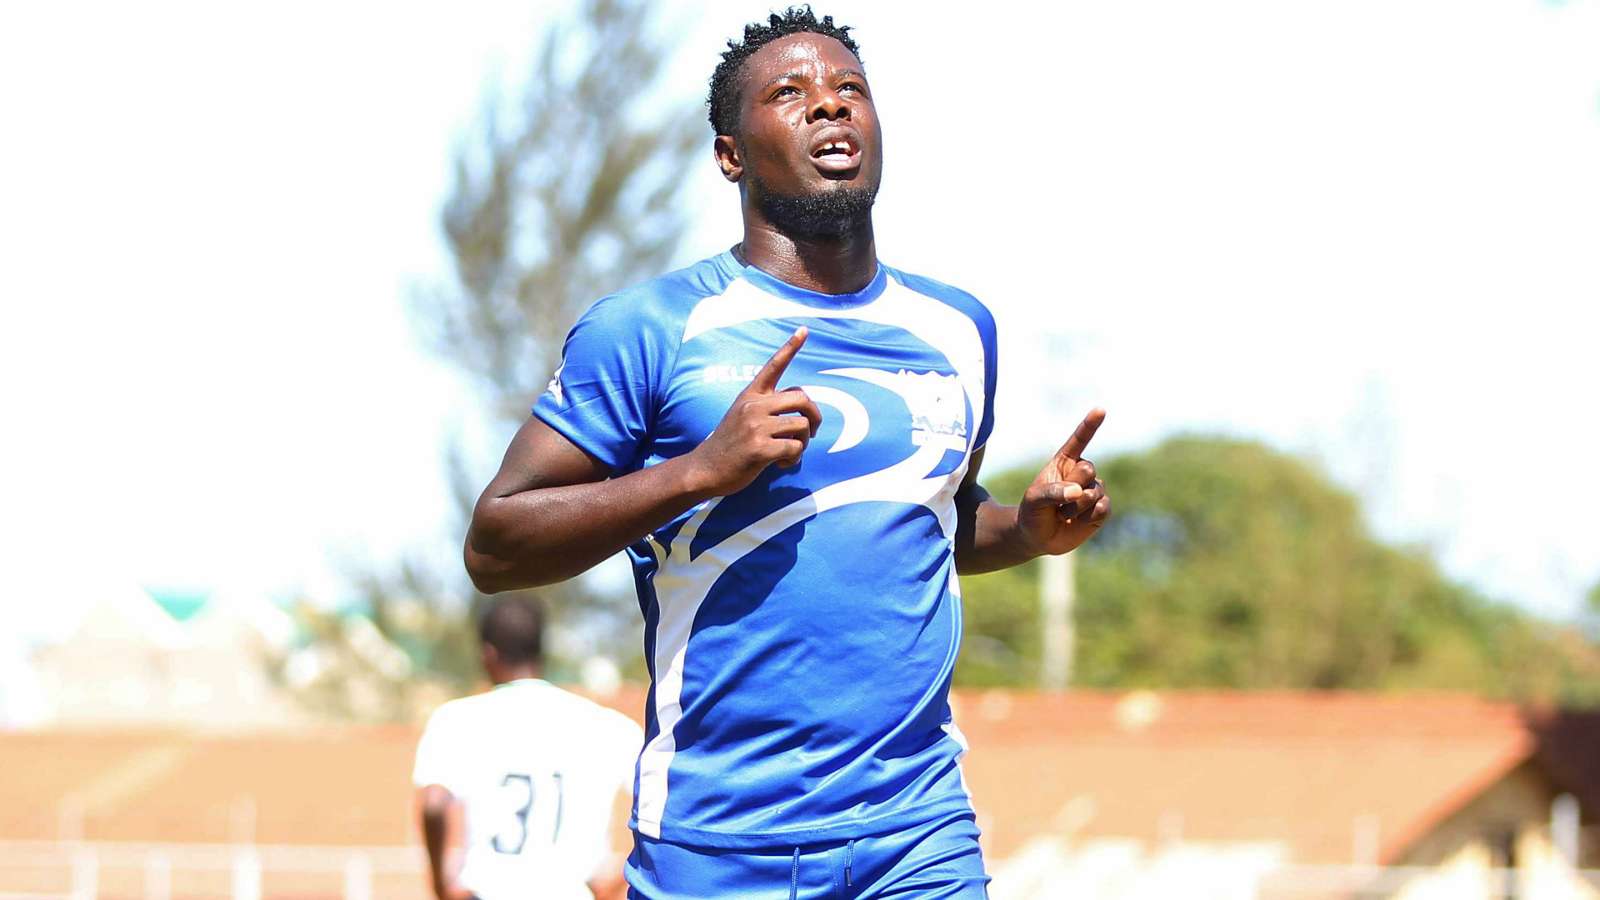 KPL Highlights: Allan Wanga opens leads in KPL while Tusker takes on Mount Kenya with a 4-1 win | FKF Premier League